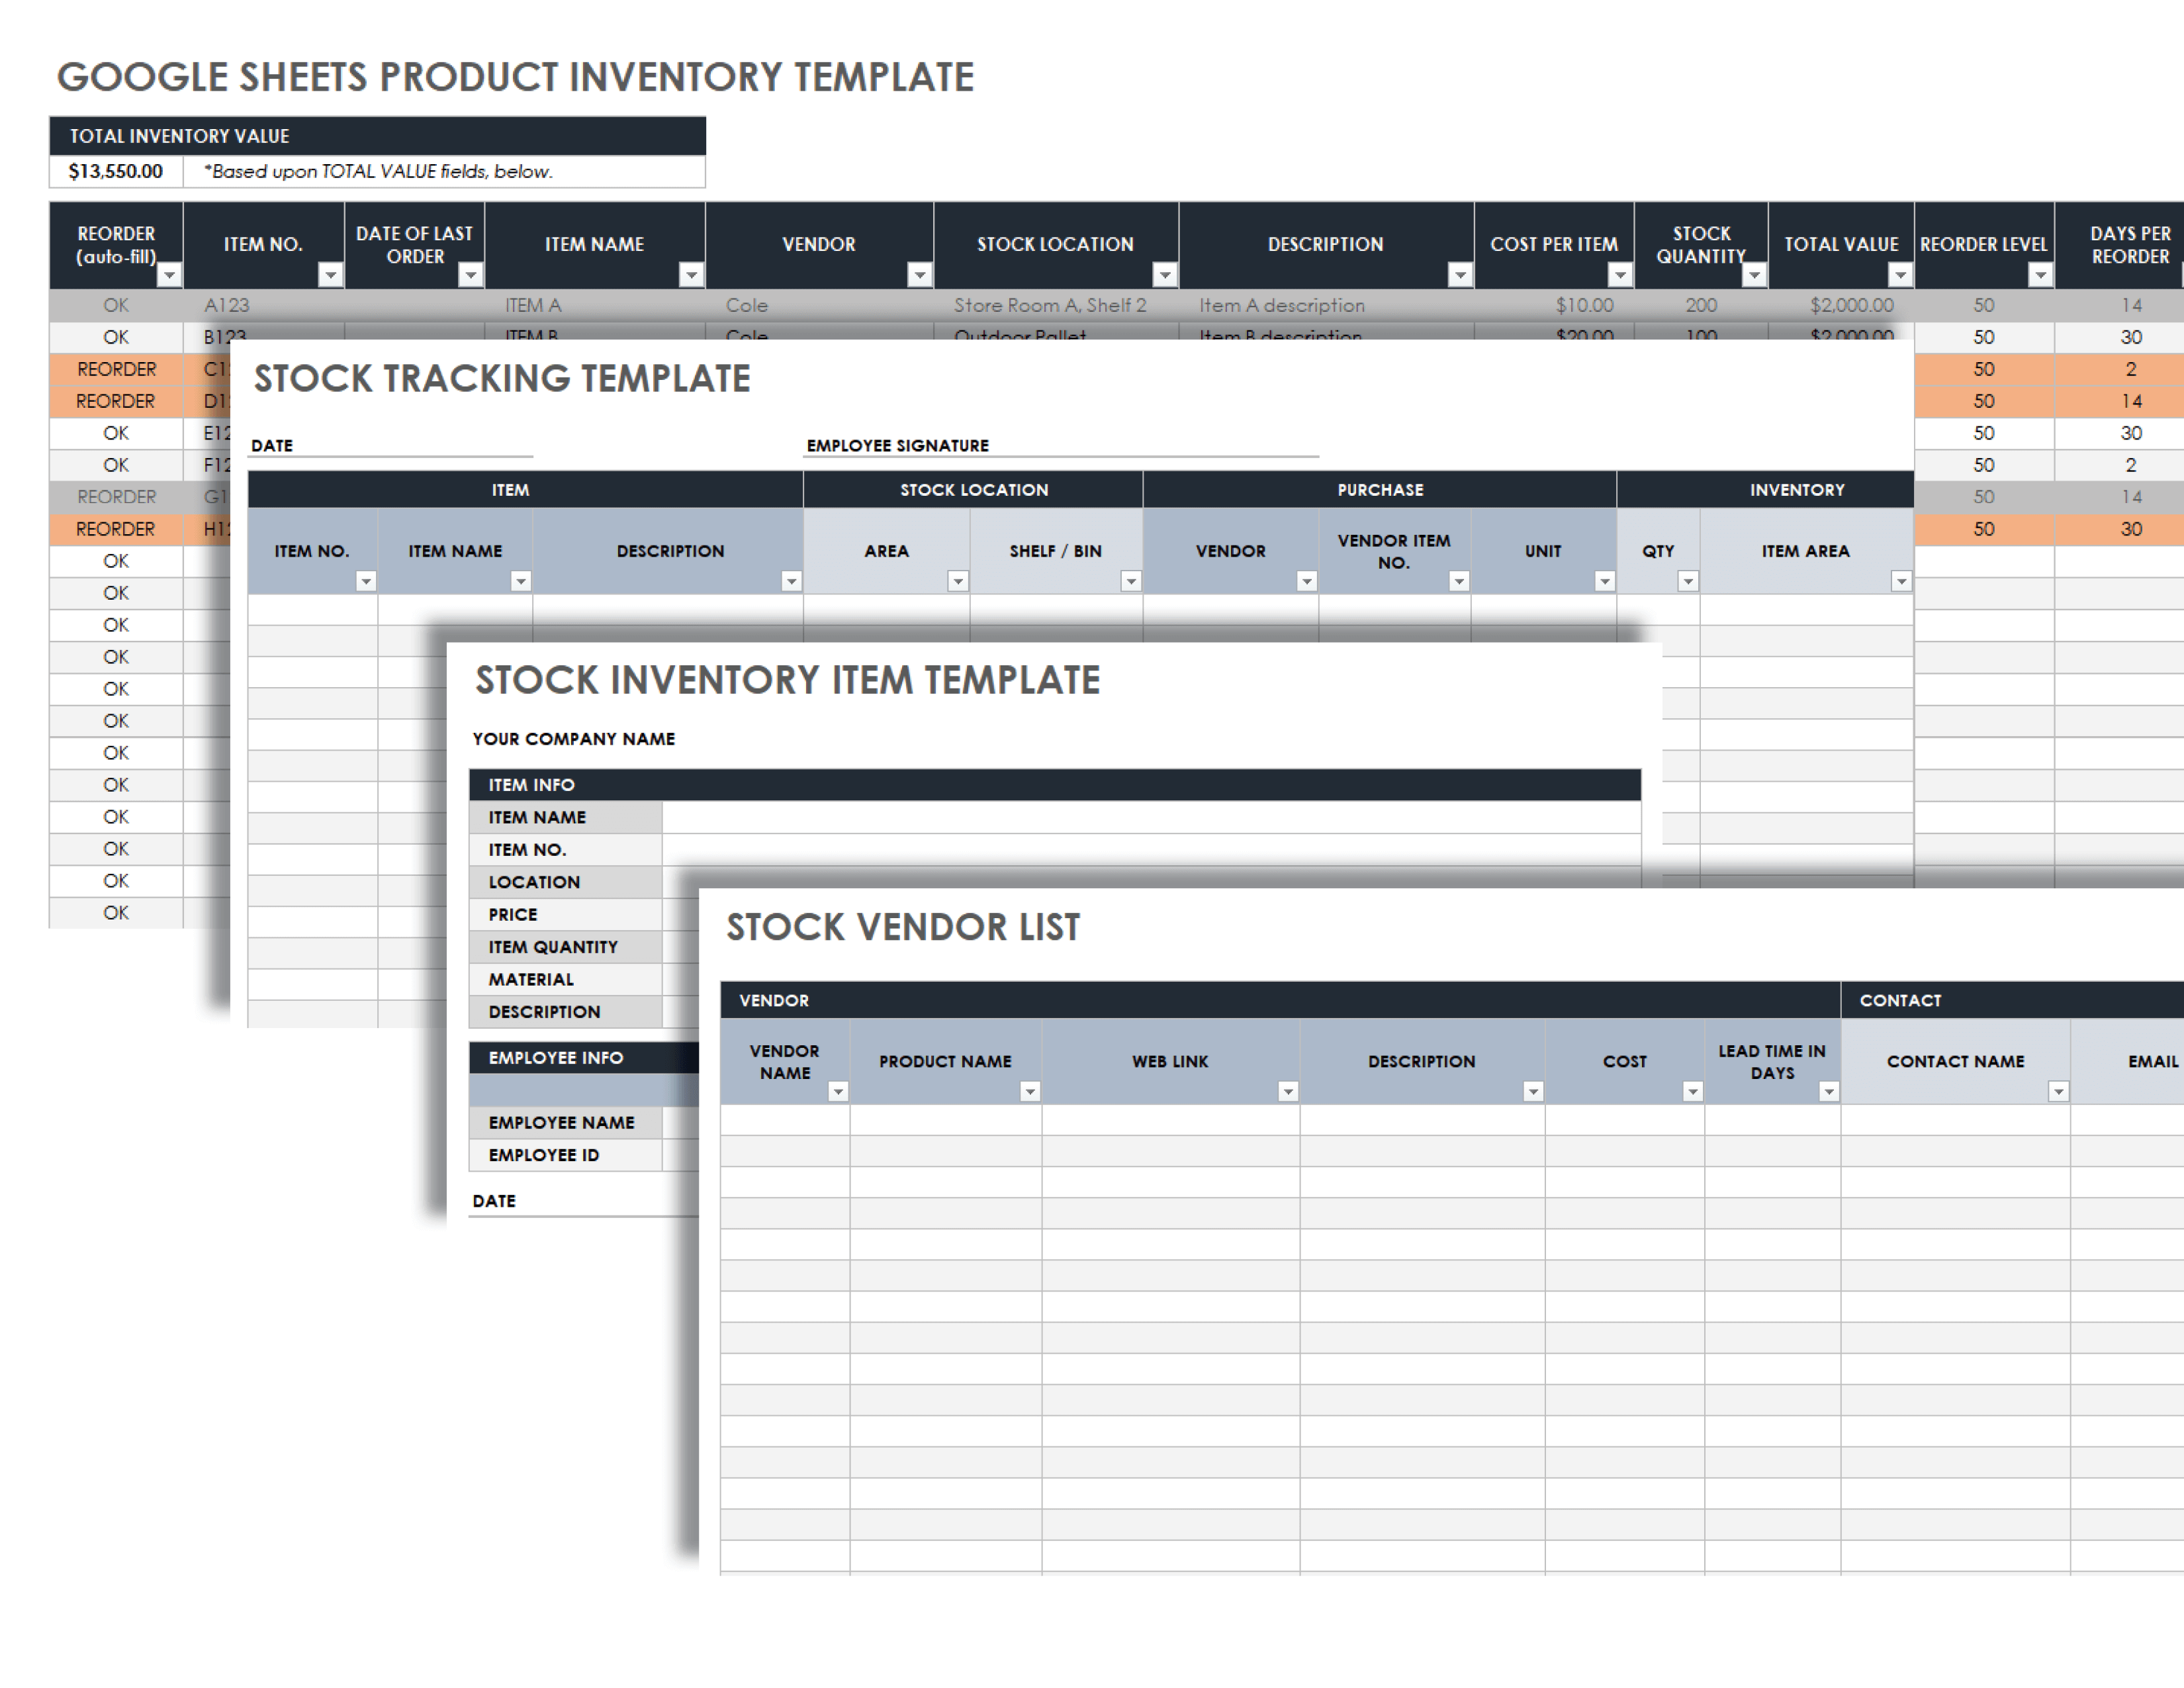 Google Sheets Product Inventory Template